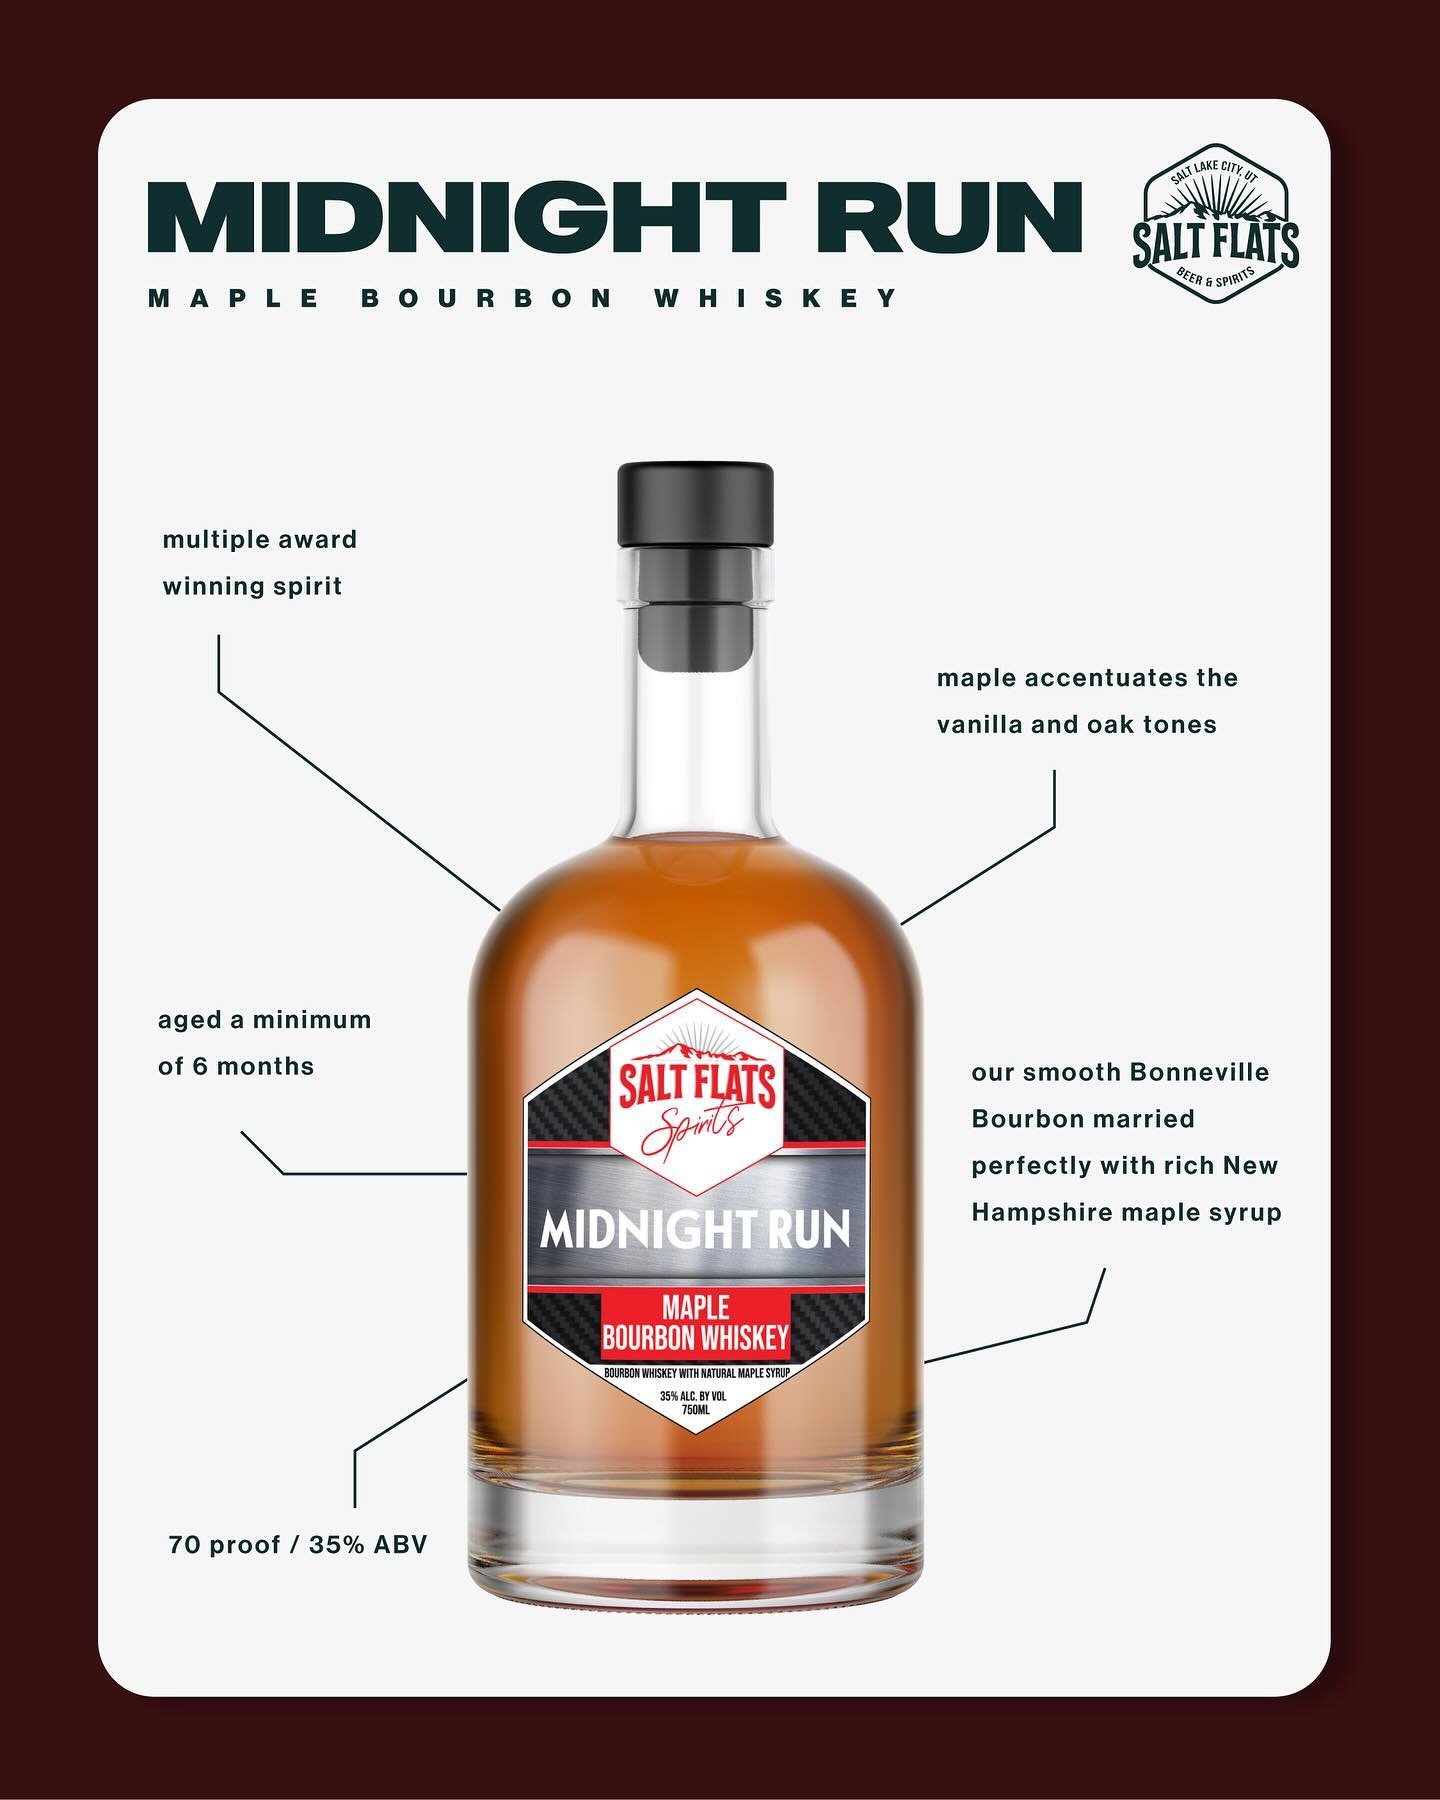 Have you tried our Midnight Run Maple Bourbon Whiskey yet? Made with our smooth Bonneville Bourbon, married perfectly with rich New Hampshire maple syrup and aged a minimum of six months. Maple accentuates the vanilla and oak tones of the bourbon mak